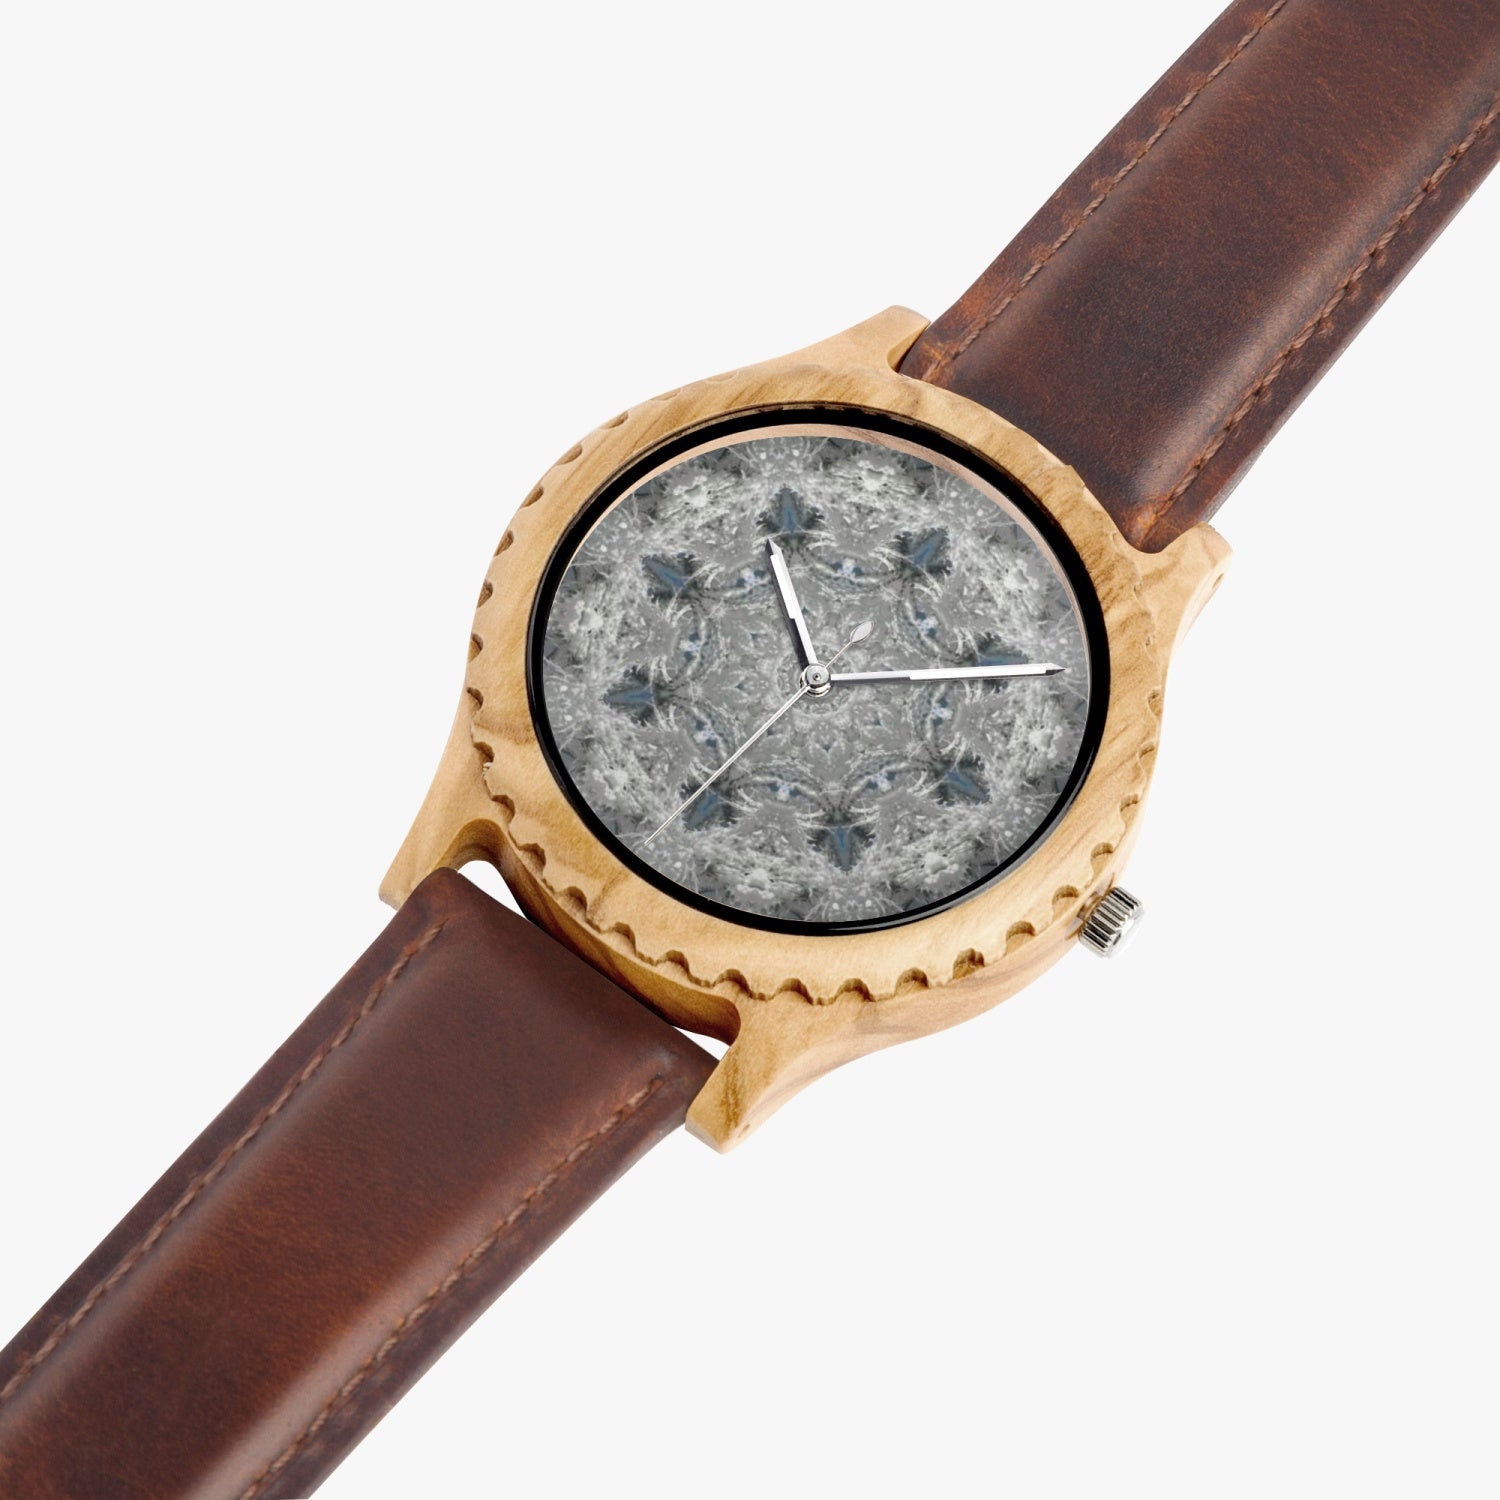 Snow Cristal Octagon, Italian Olive Lumber Wooden Watch - Leather Strap, by Sensus Studio Design